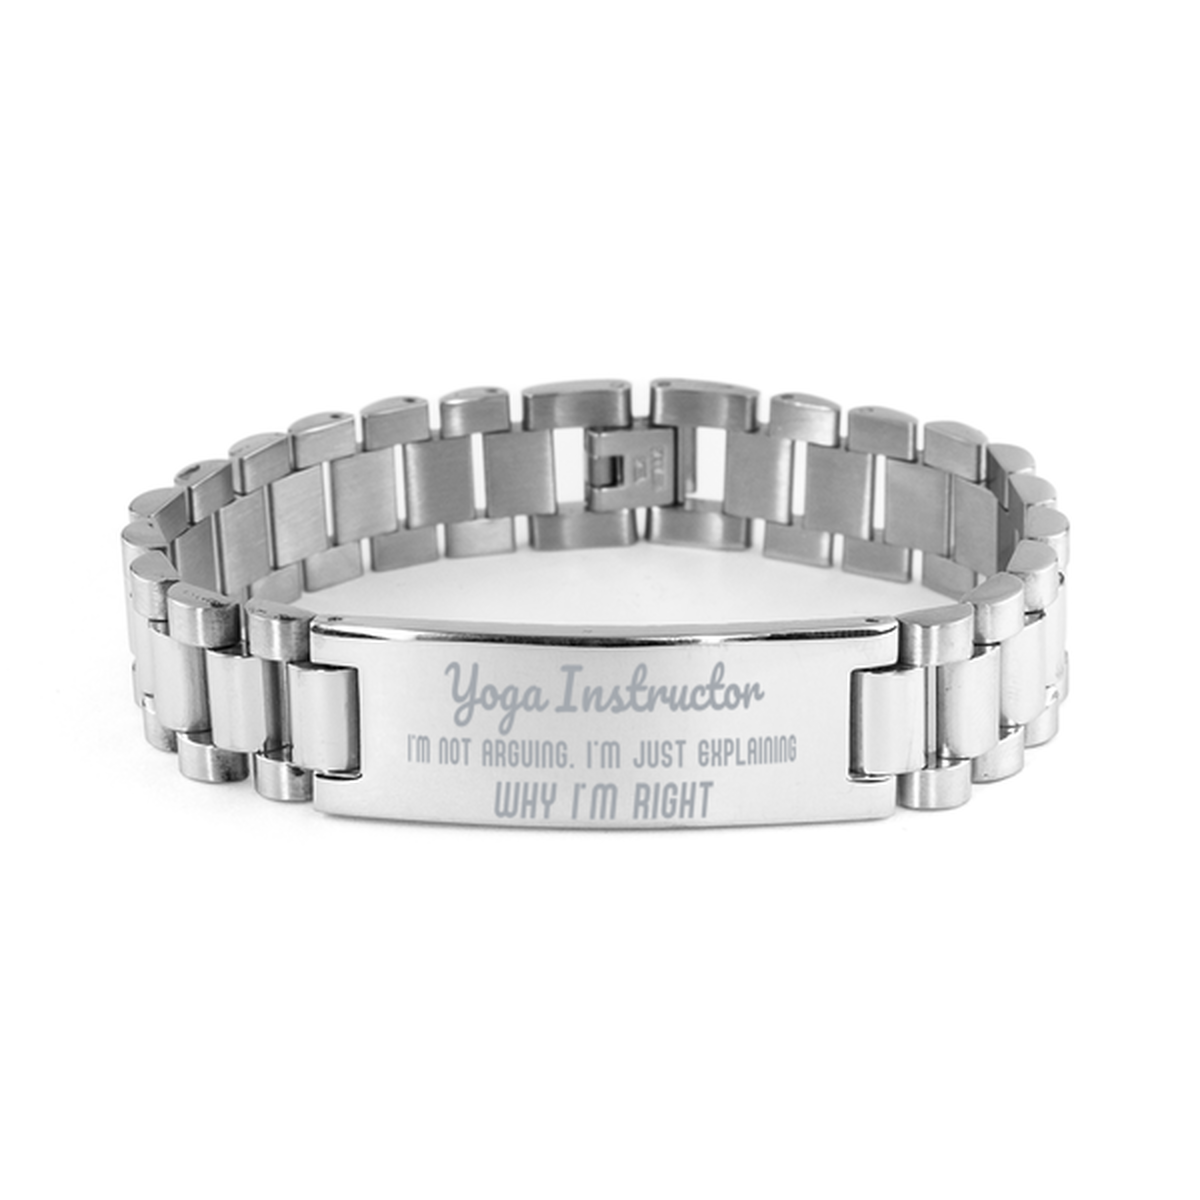 Yoga Instructor I'm not Arguing. I'm Just Explaining Why I'm RIGHT Ladder Stainless Steel Bracelet, Graduation Birthday Christmas Yoga Instructor Gifts For Yoga Instructor Funny Saying Quote Present for Men Women Coworker